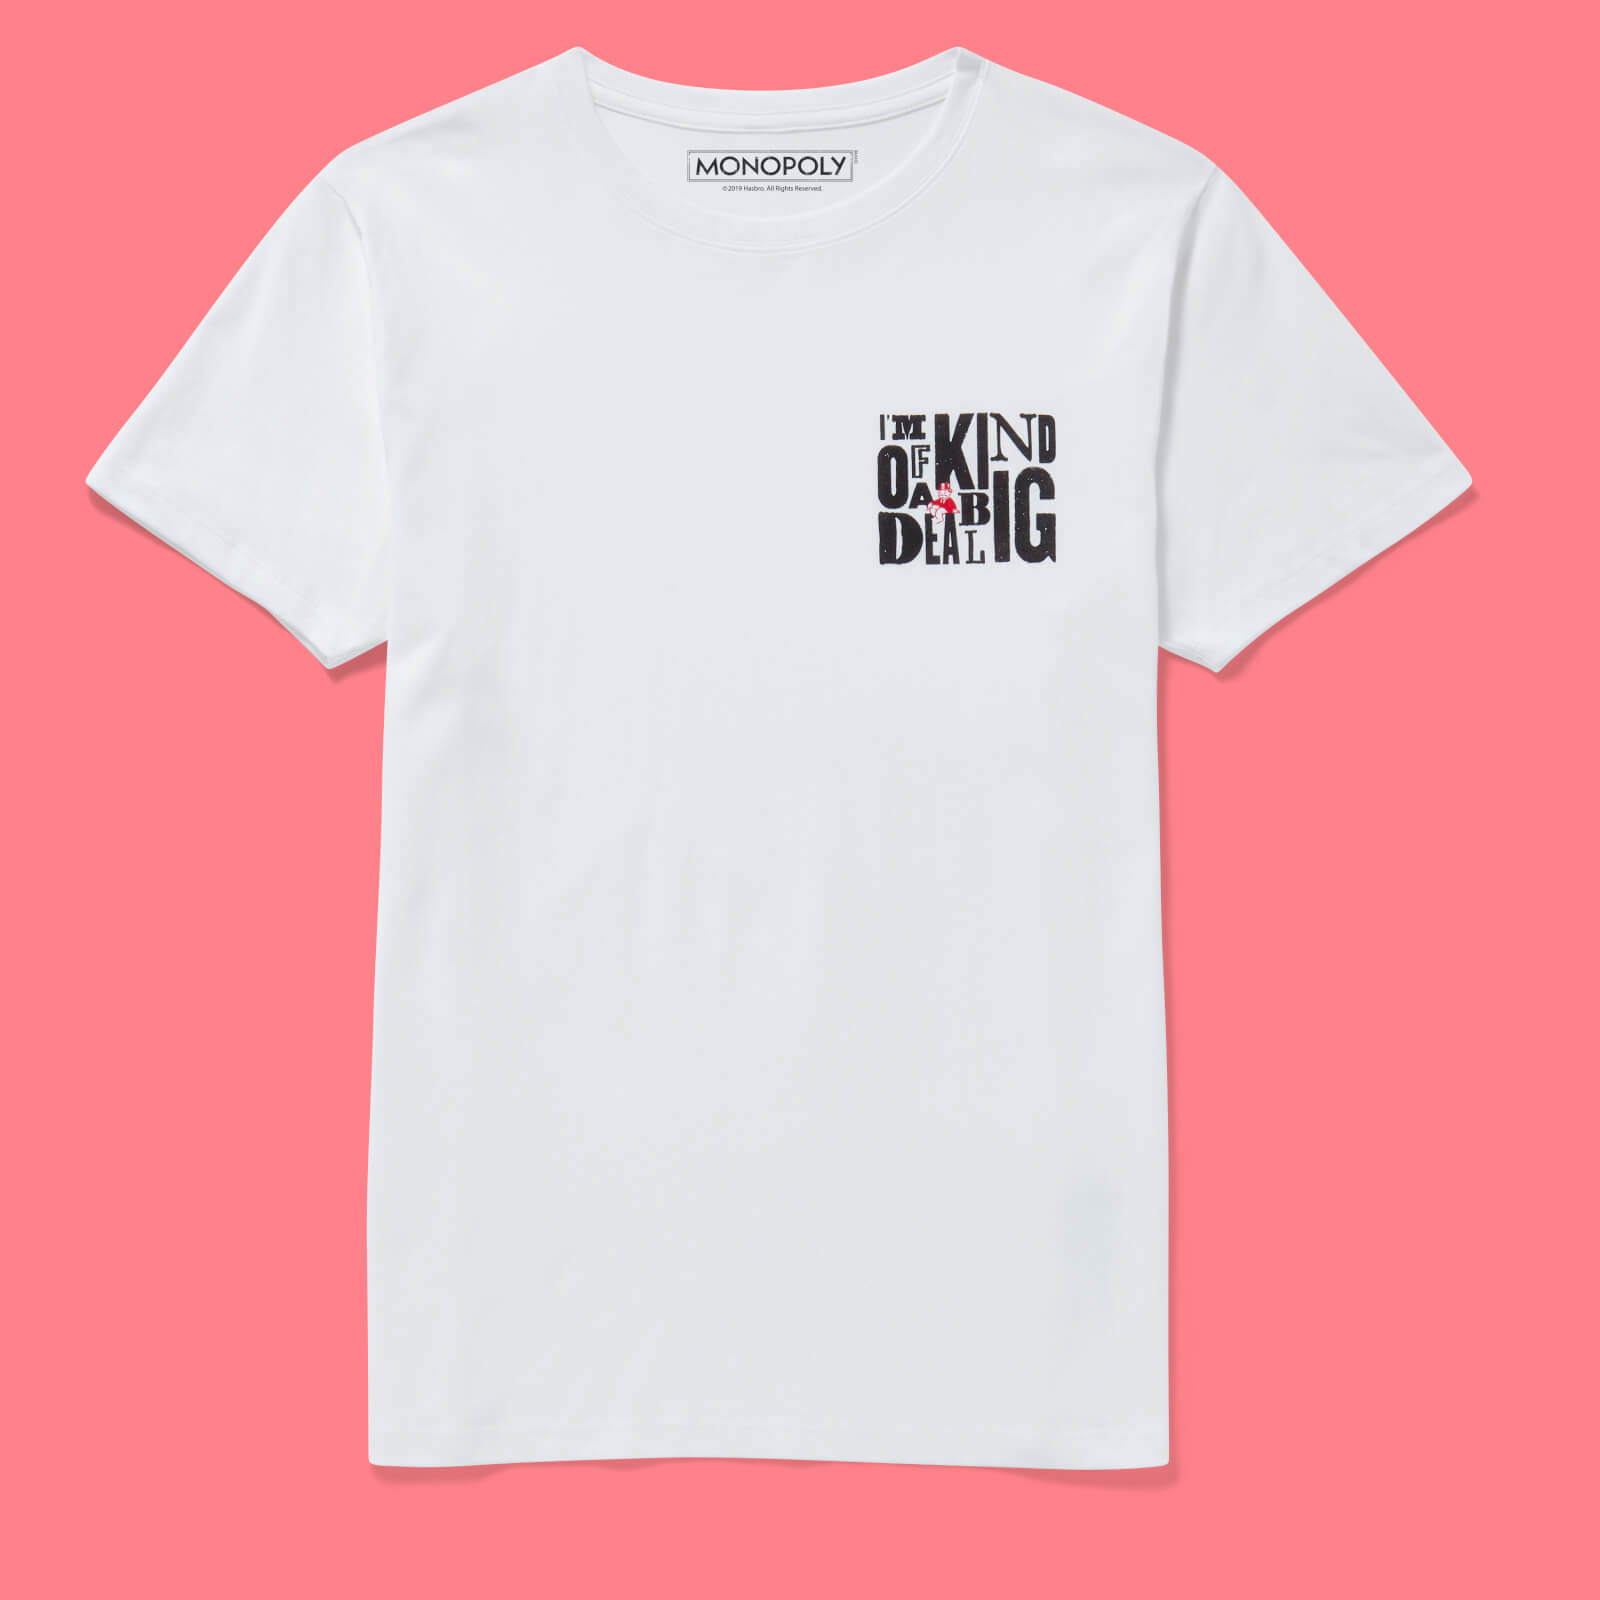 Monopoly King Of Dealing T-Shirt - White - L - Weiß von Monopoly